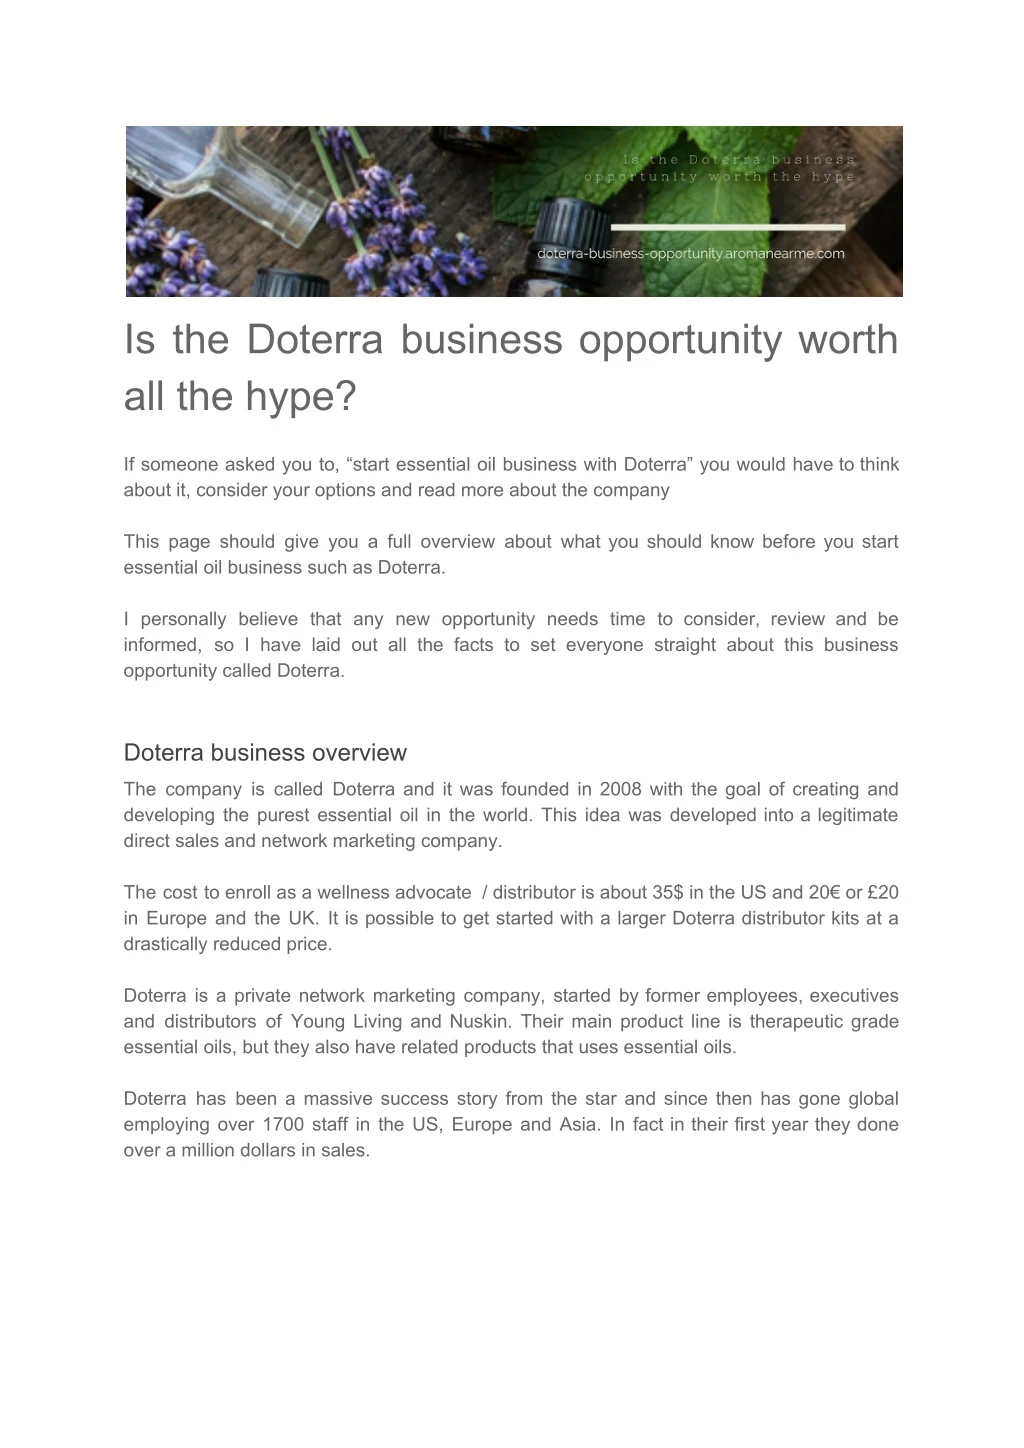 is the doterra business opportunity worth